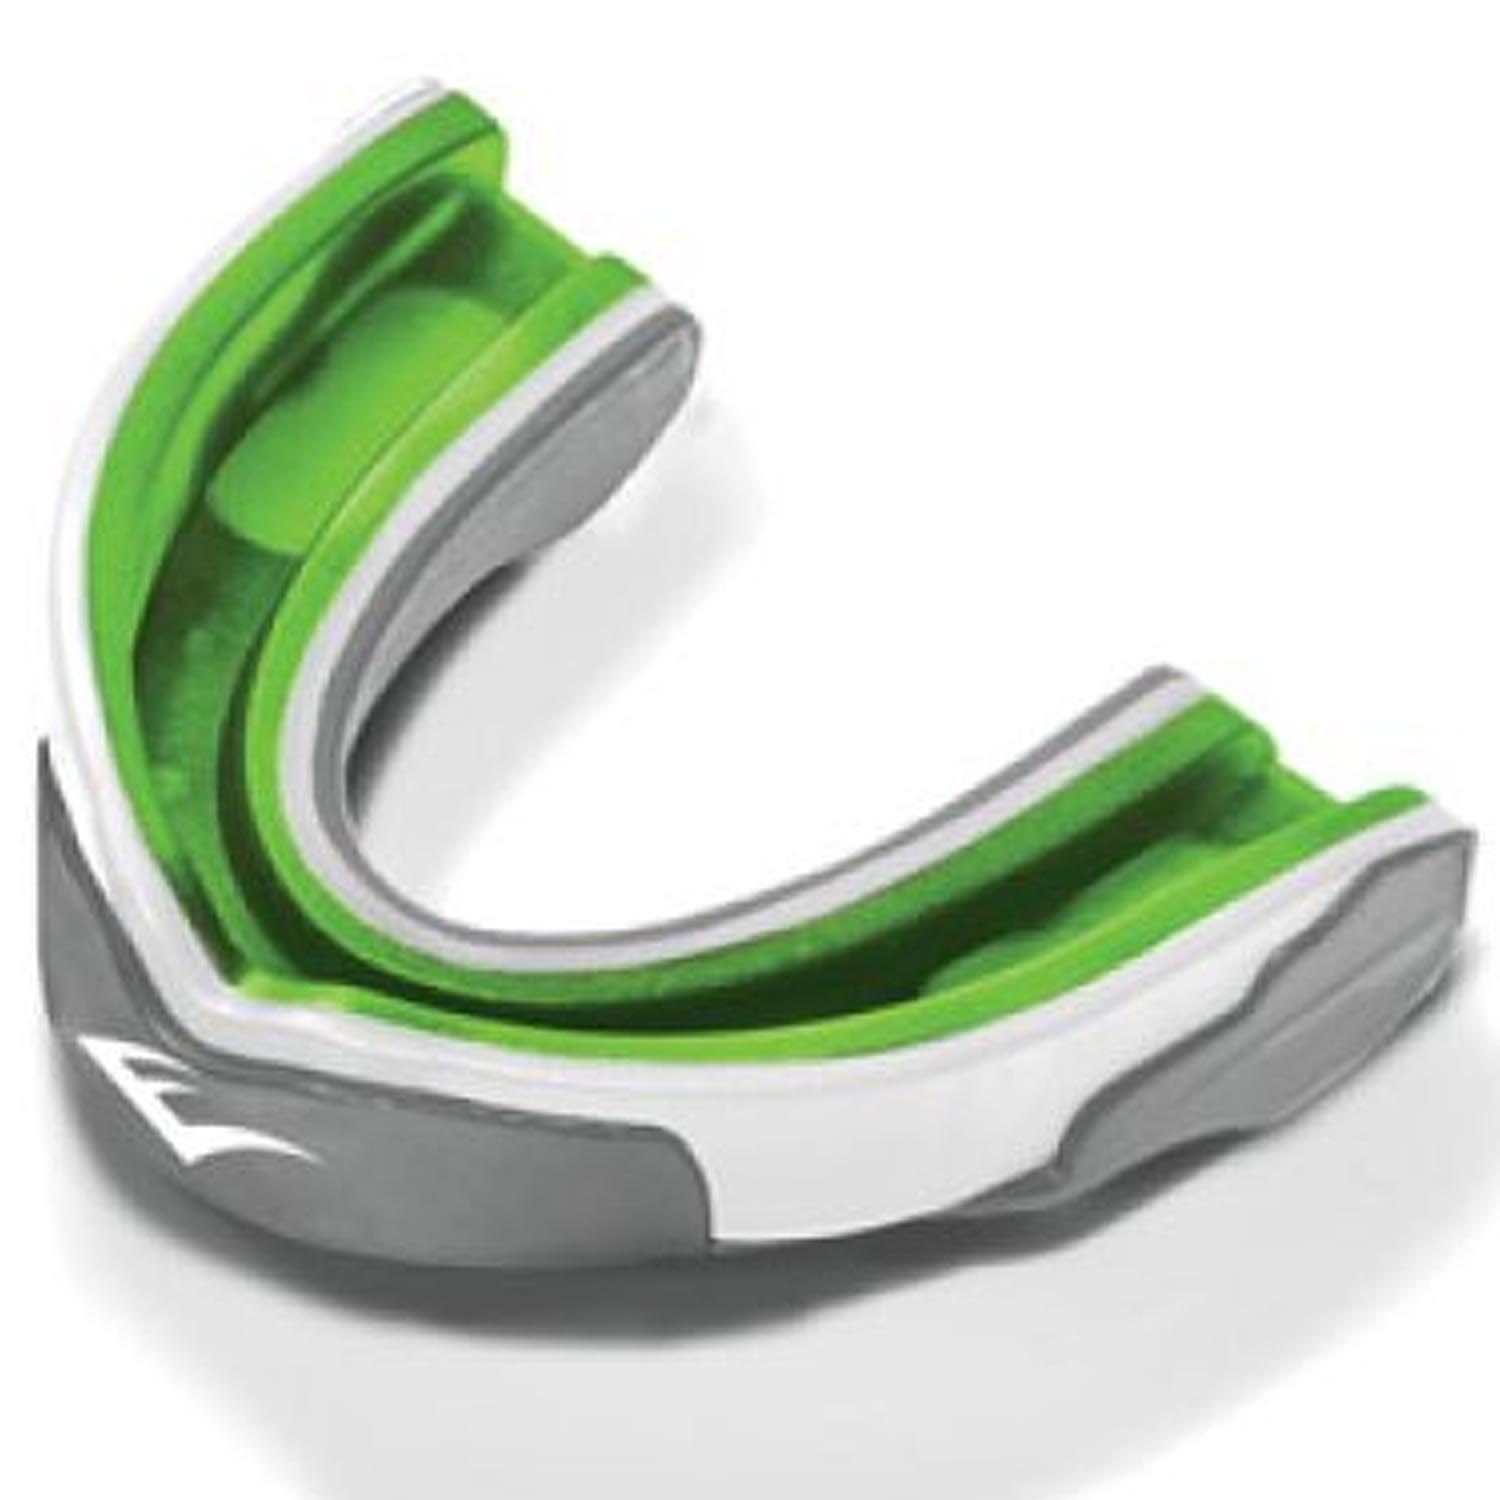 Everlast Mouth Guard, Evergel, green-white